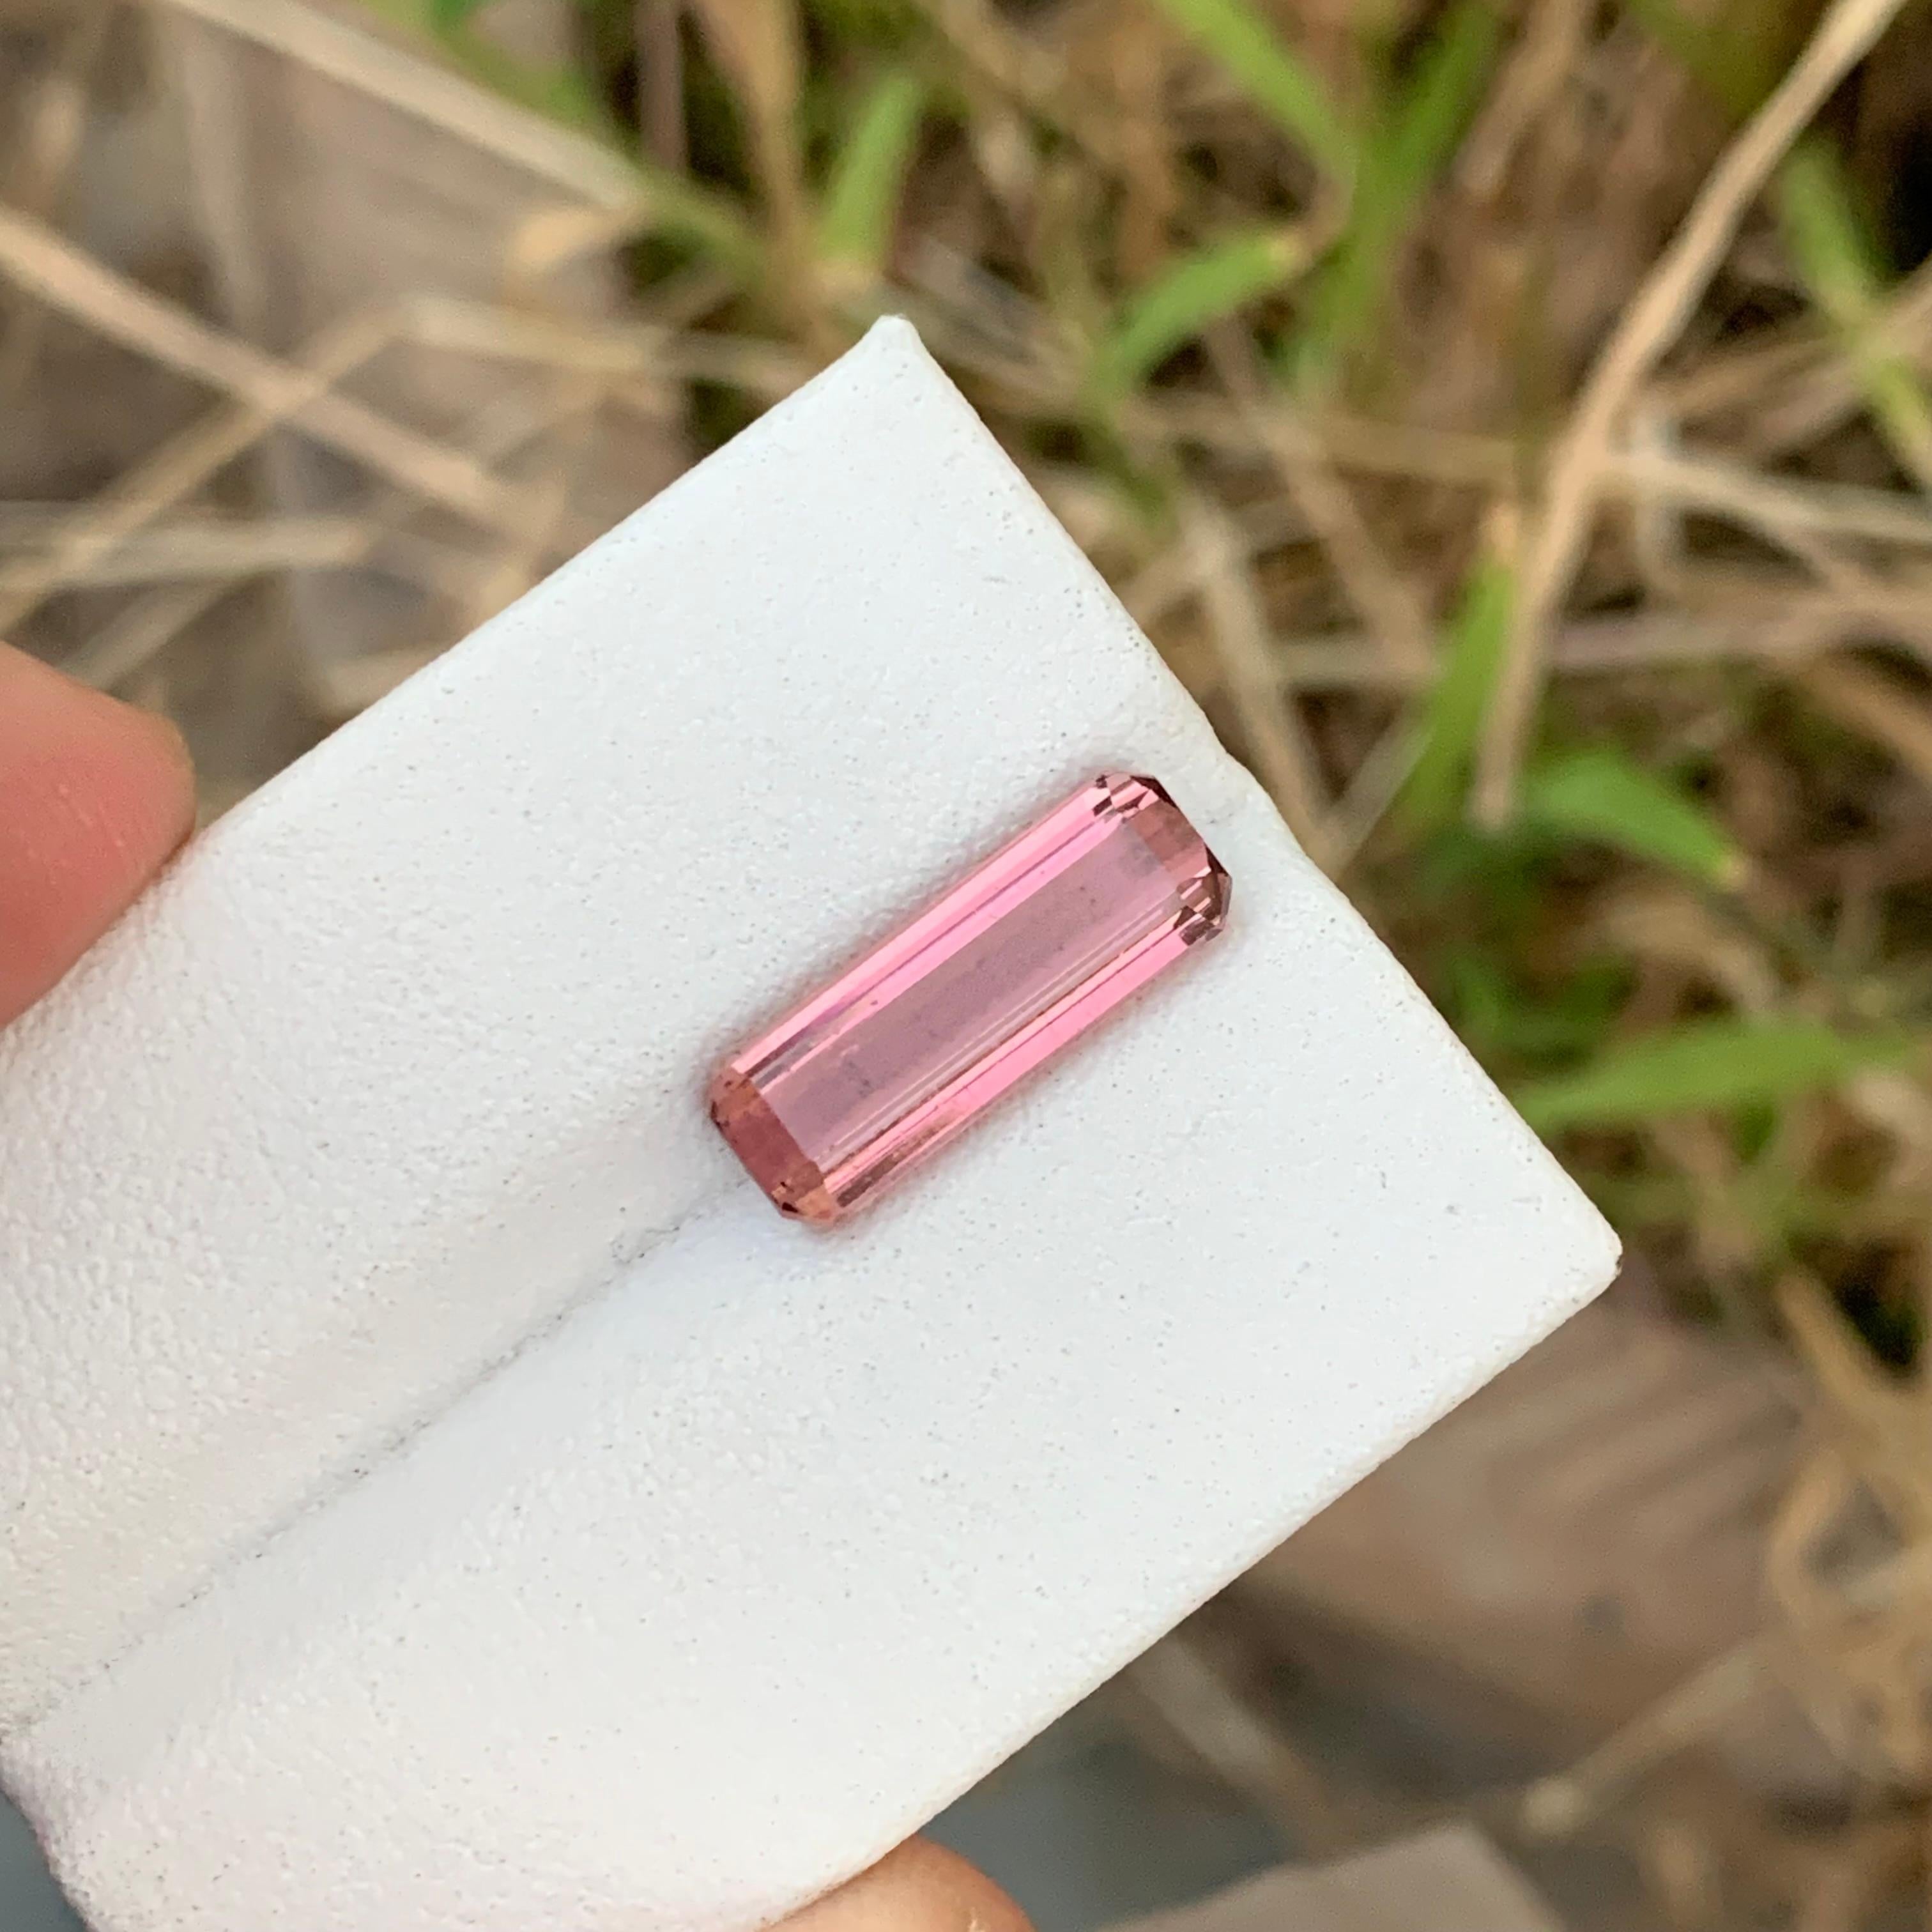 Loose Pink Tourmaline
Weight: 3.55  Carats
Dimension: 15 x 5.3 x 4.4 Mm
Colour: Pink
Origin: Afghanistan
Shape : Emerald 
Certificate: On Demand
Treatment: Non

Pink tourmaline, known for its captivating hue ranging from delicate pastel shades to